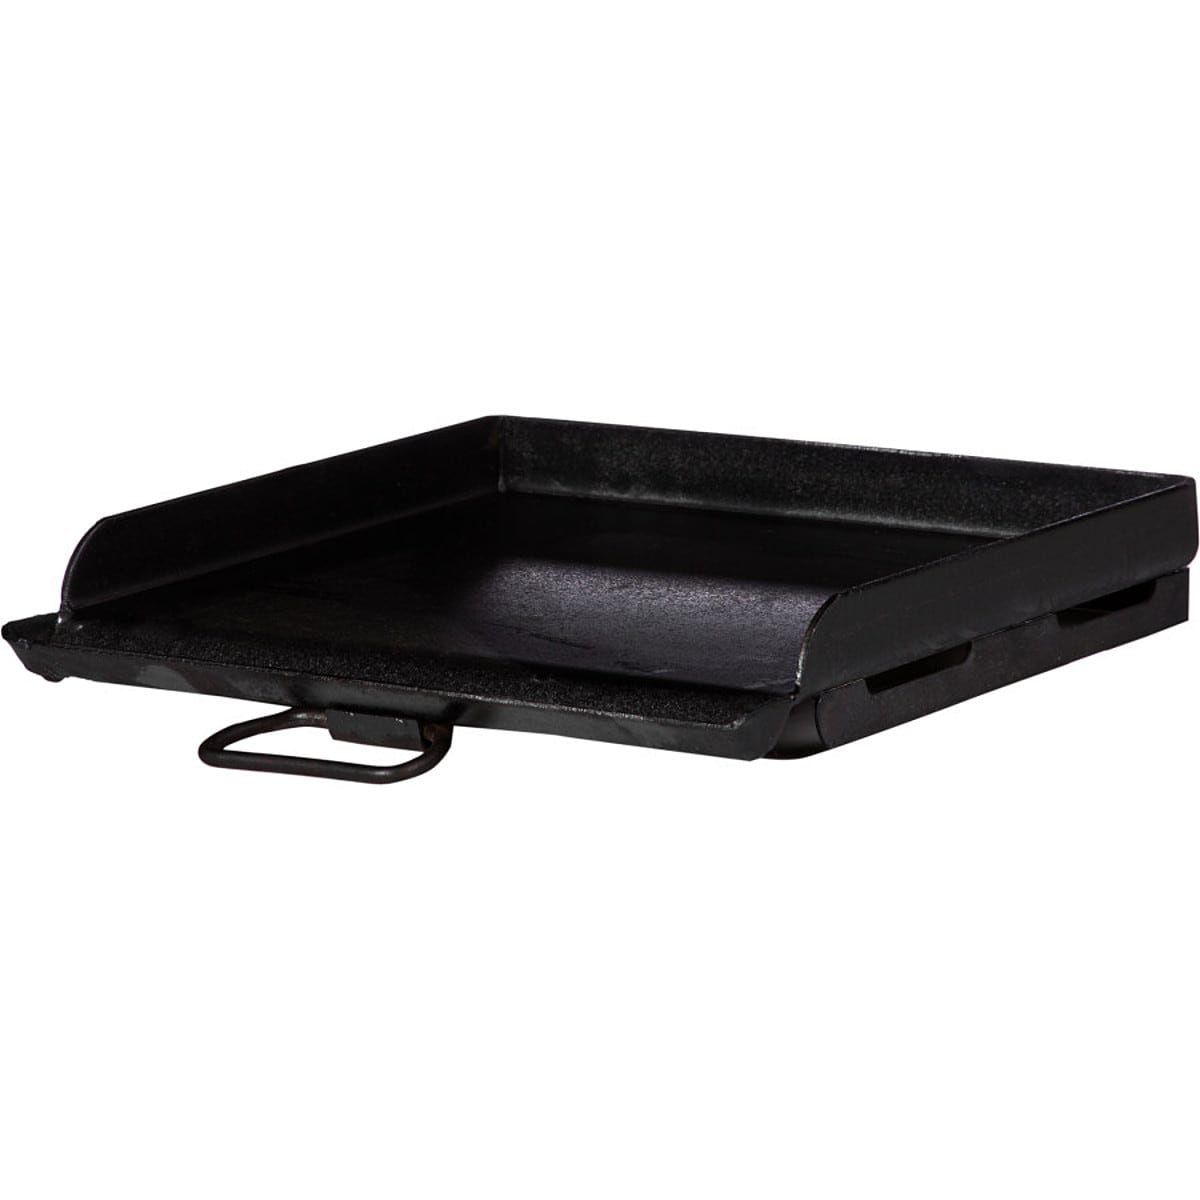 Camp Chef 14 x 12 Large Professional Heavy-Duty Steel Flat Top Griddle -  SG14